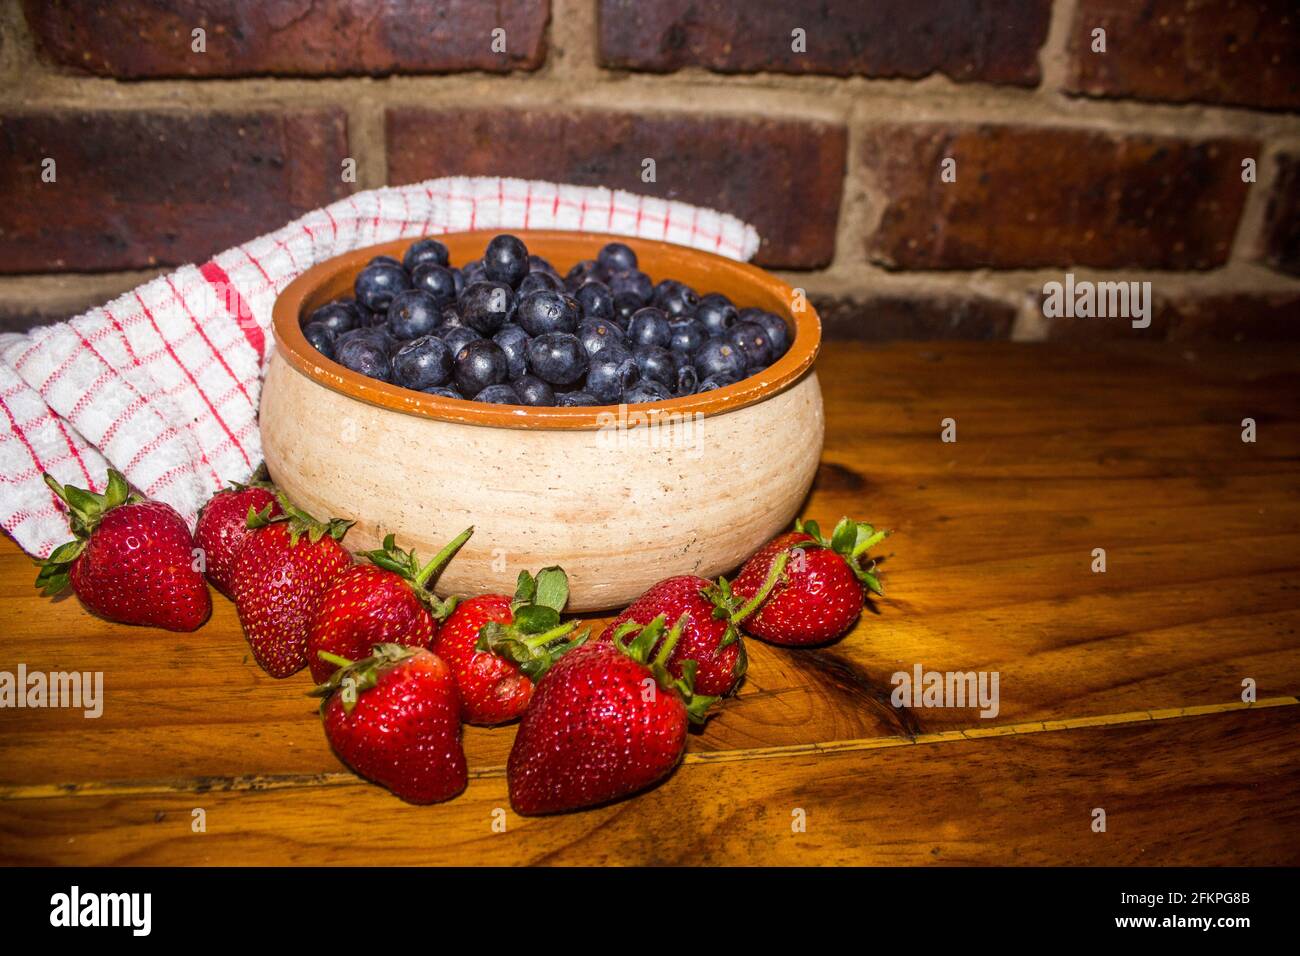 A still life consisting of a rustic pottery bowl filled with large succulent Blueberries, surrounded by strawberries Stock Photo